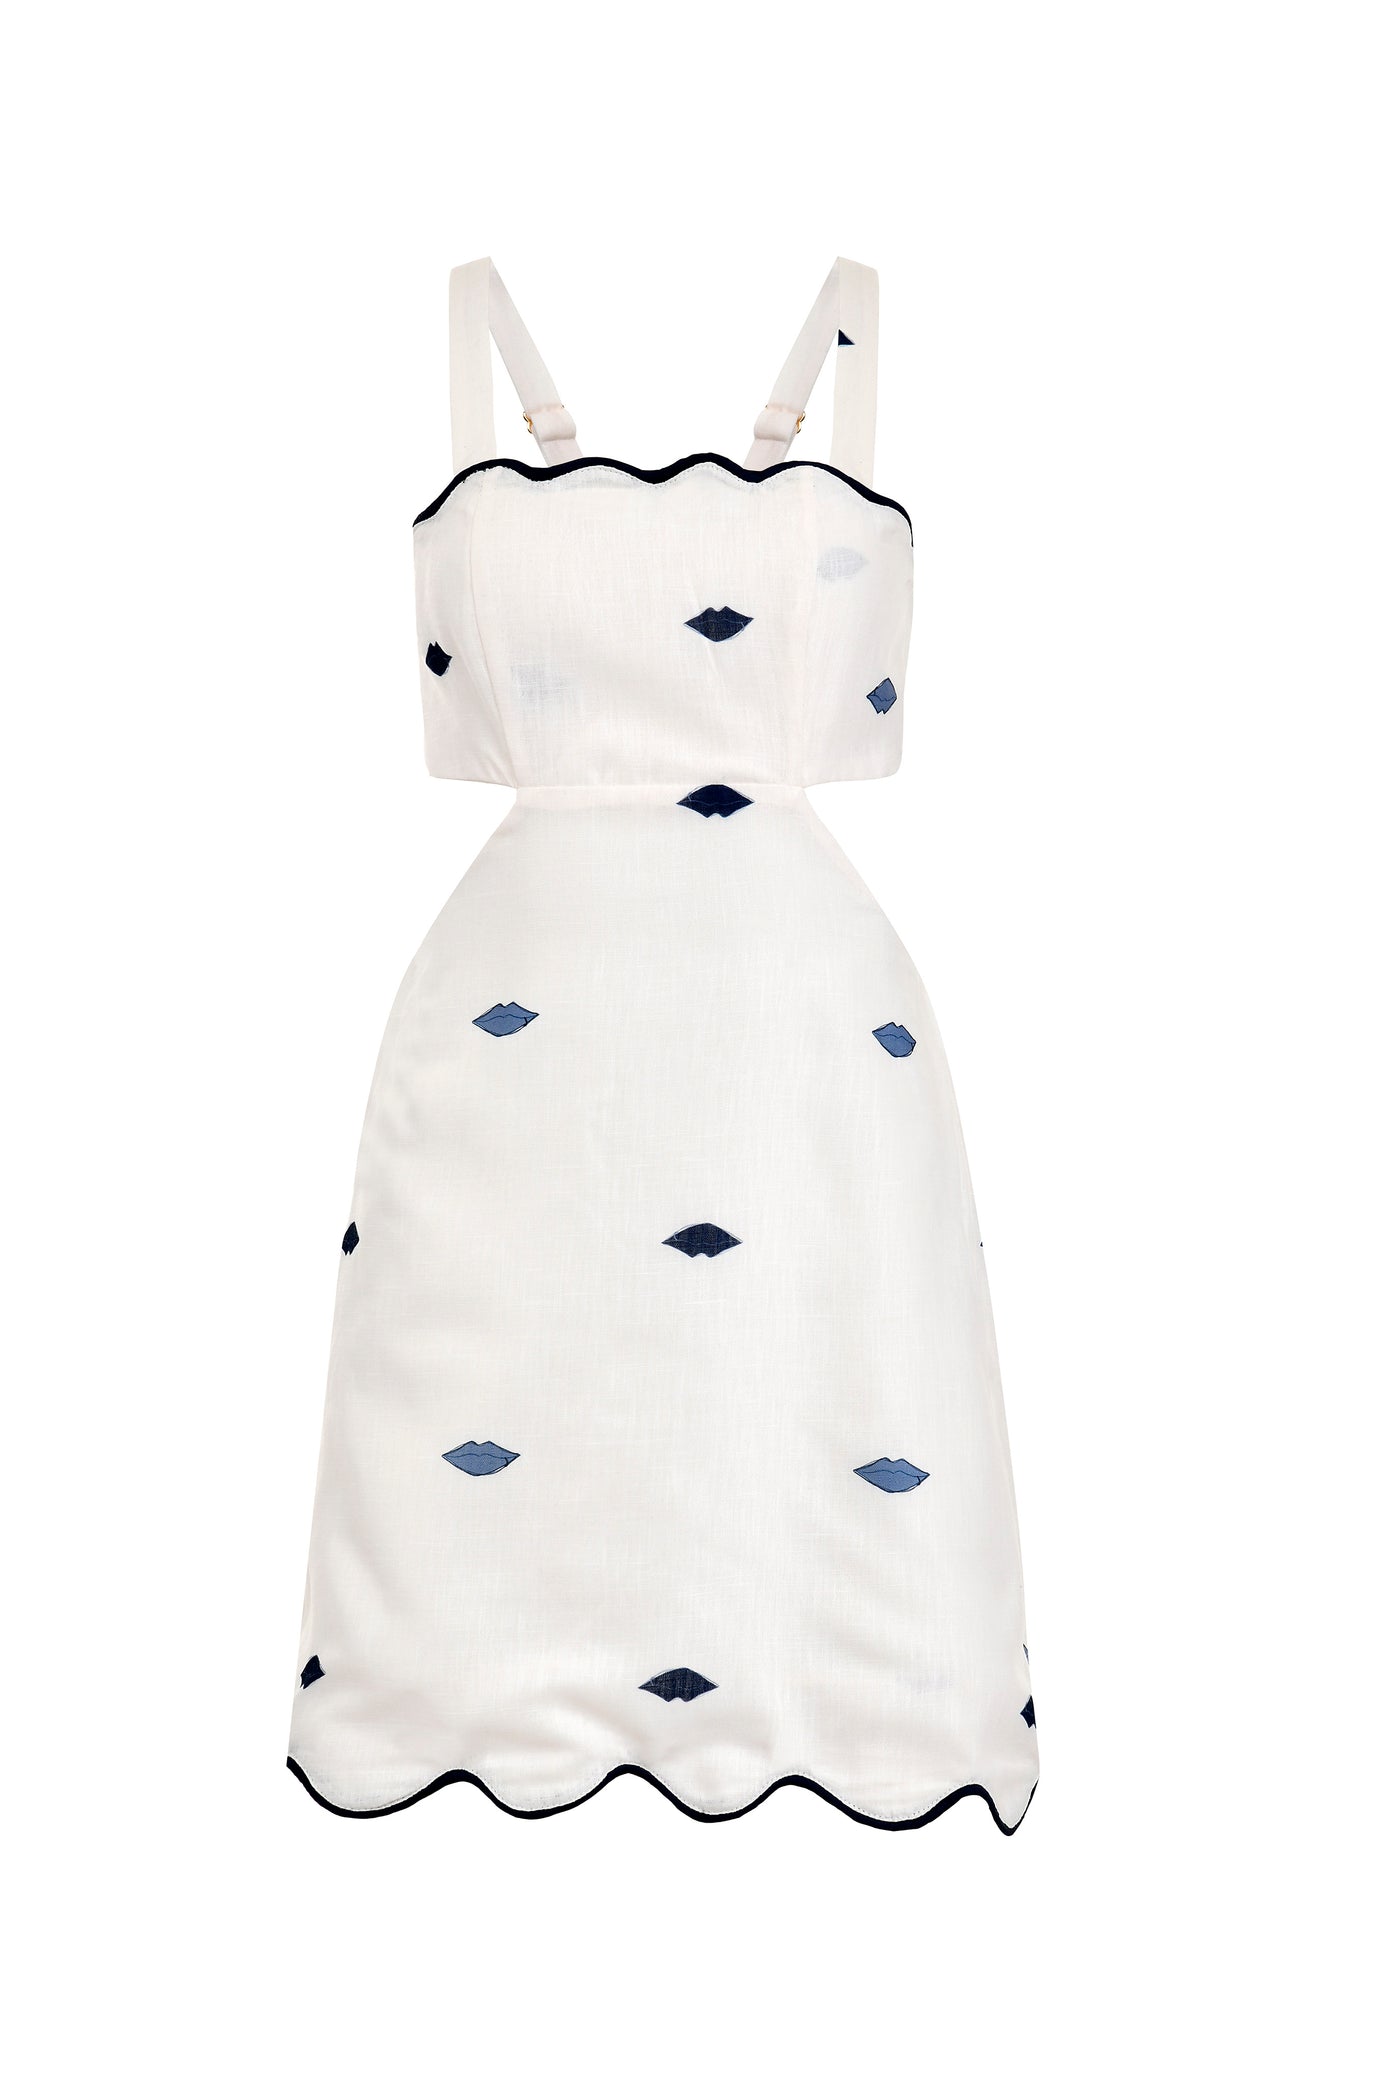 Kisses and Cuddles Dress